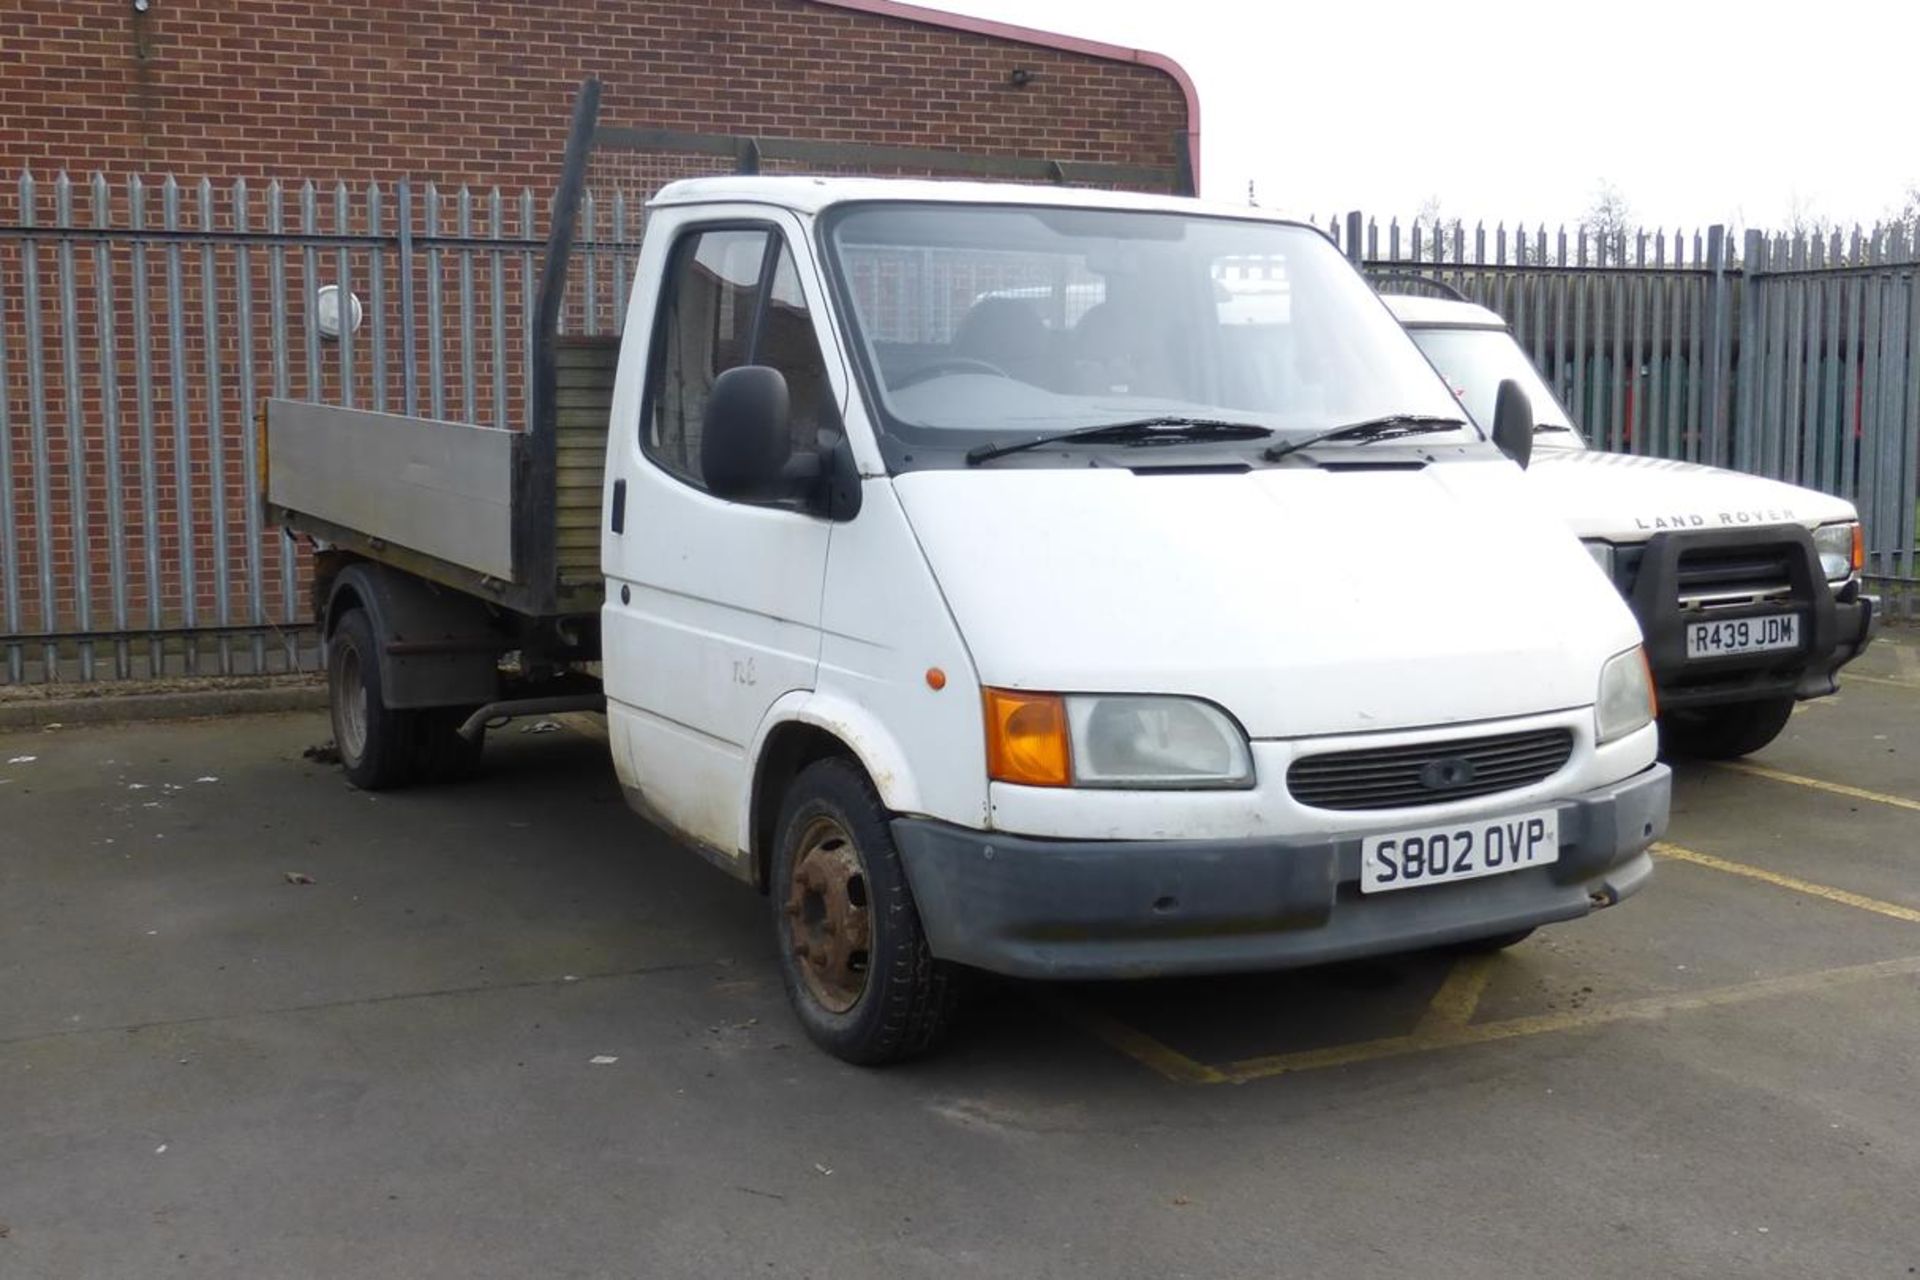 A Ford Transit Flatbed/Pickup in White 2496cc Diesel, Date of First Registration February 1999,